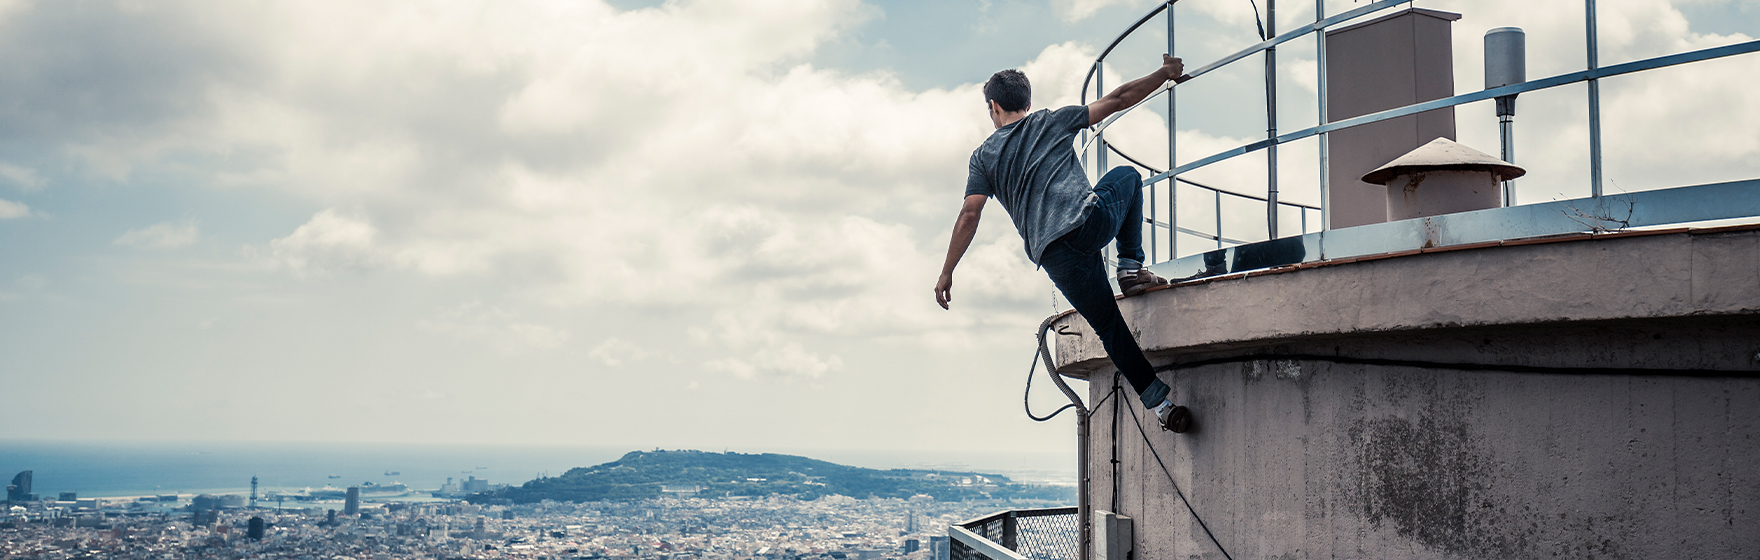 Man practicing parkour and hanging from the side of tall structure looking out at the city